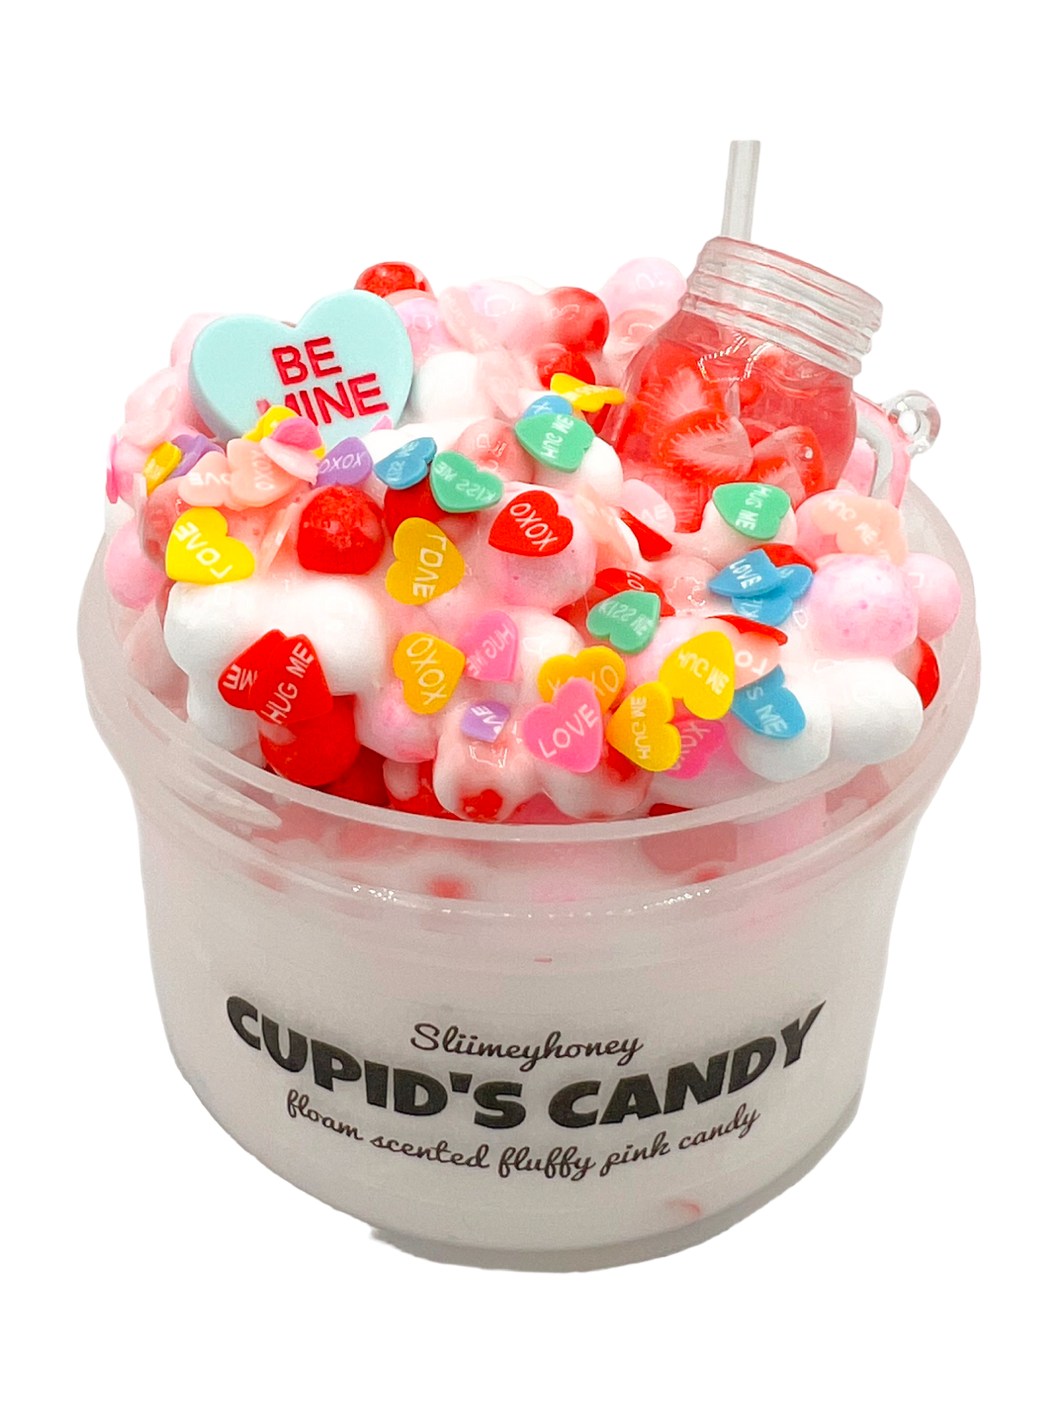 Cupid’s Candy